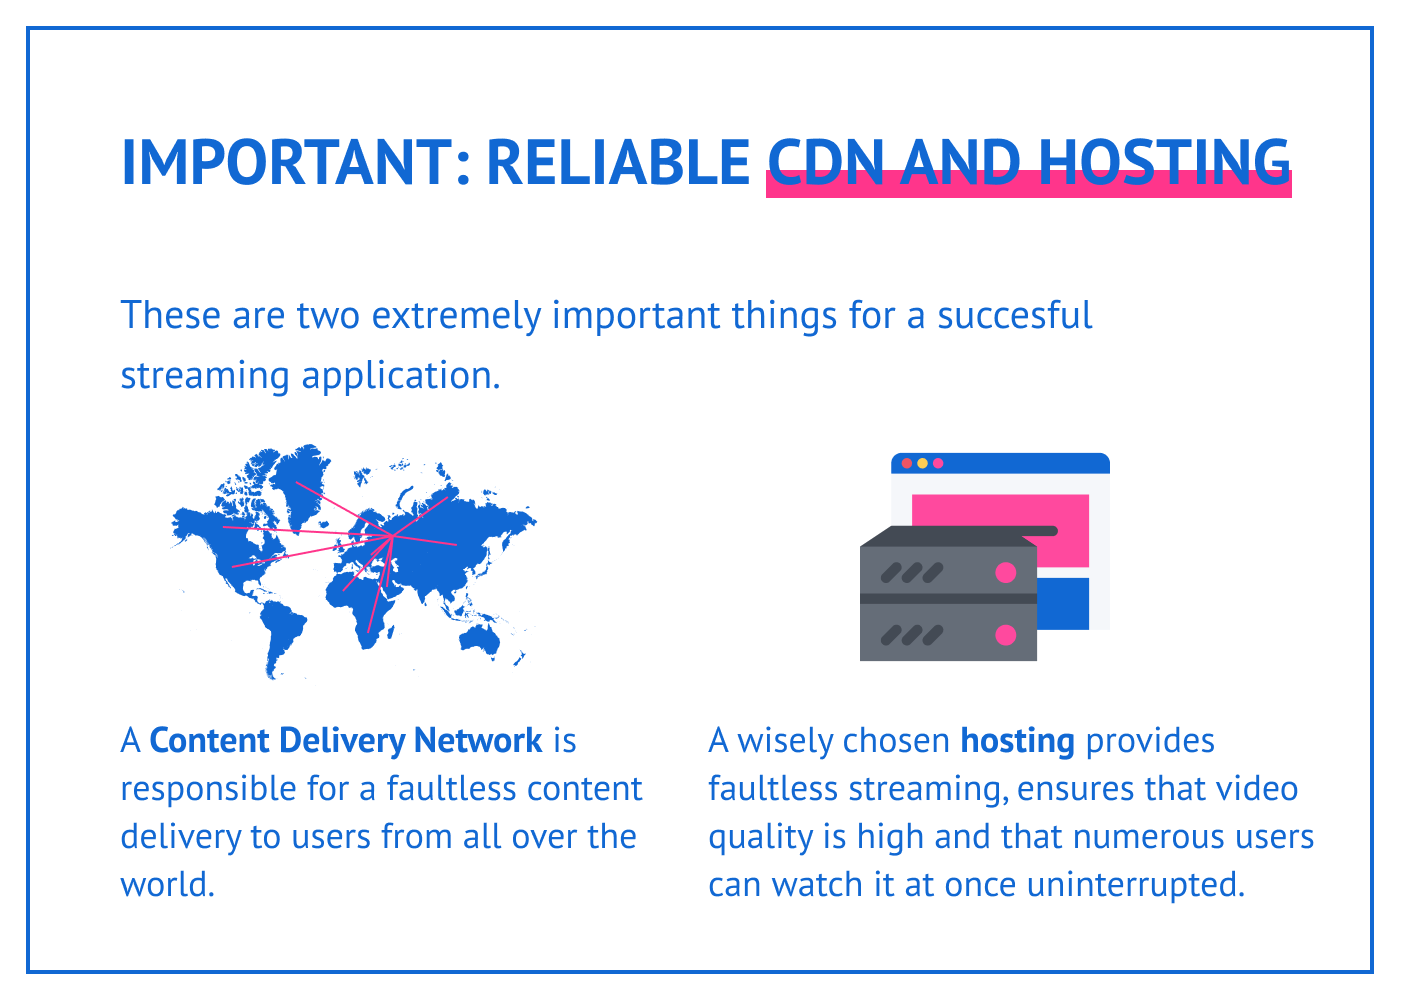 Picking a reliable CDN and hosting.